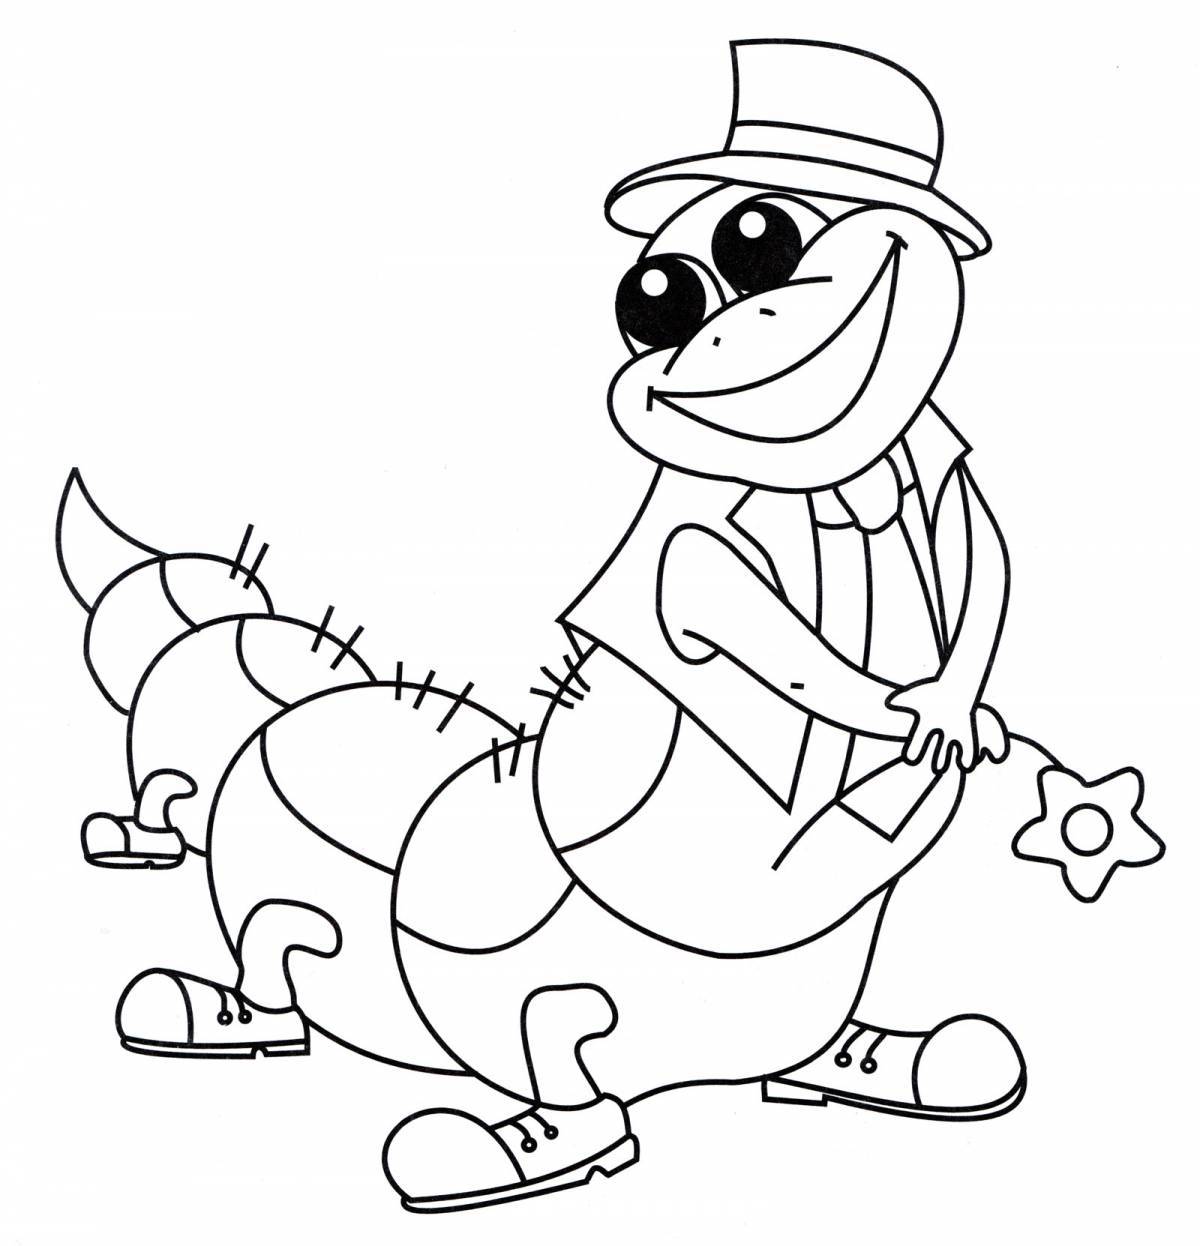 Adorable pug caterpillar coloring page